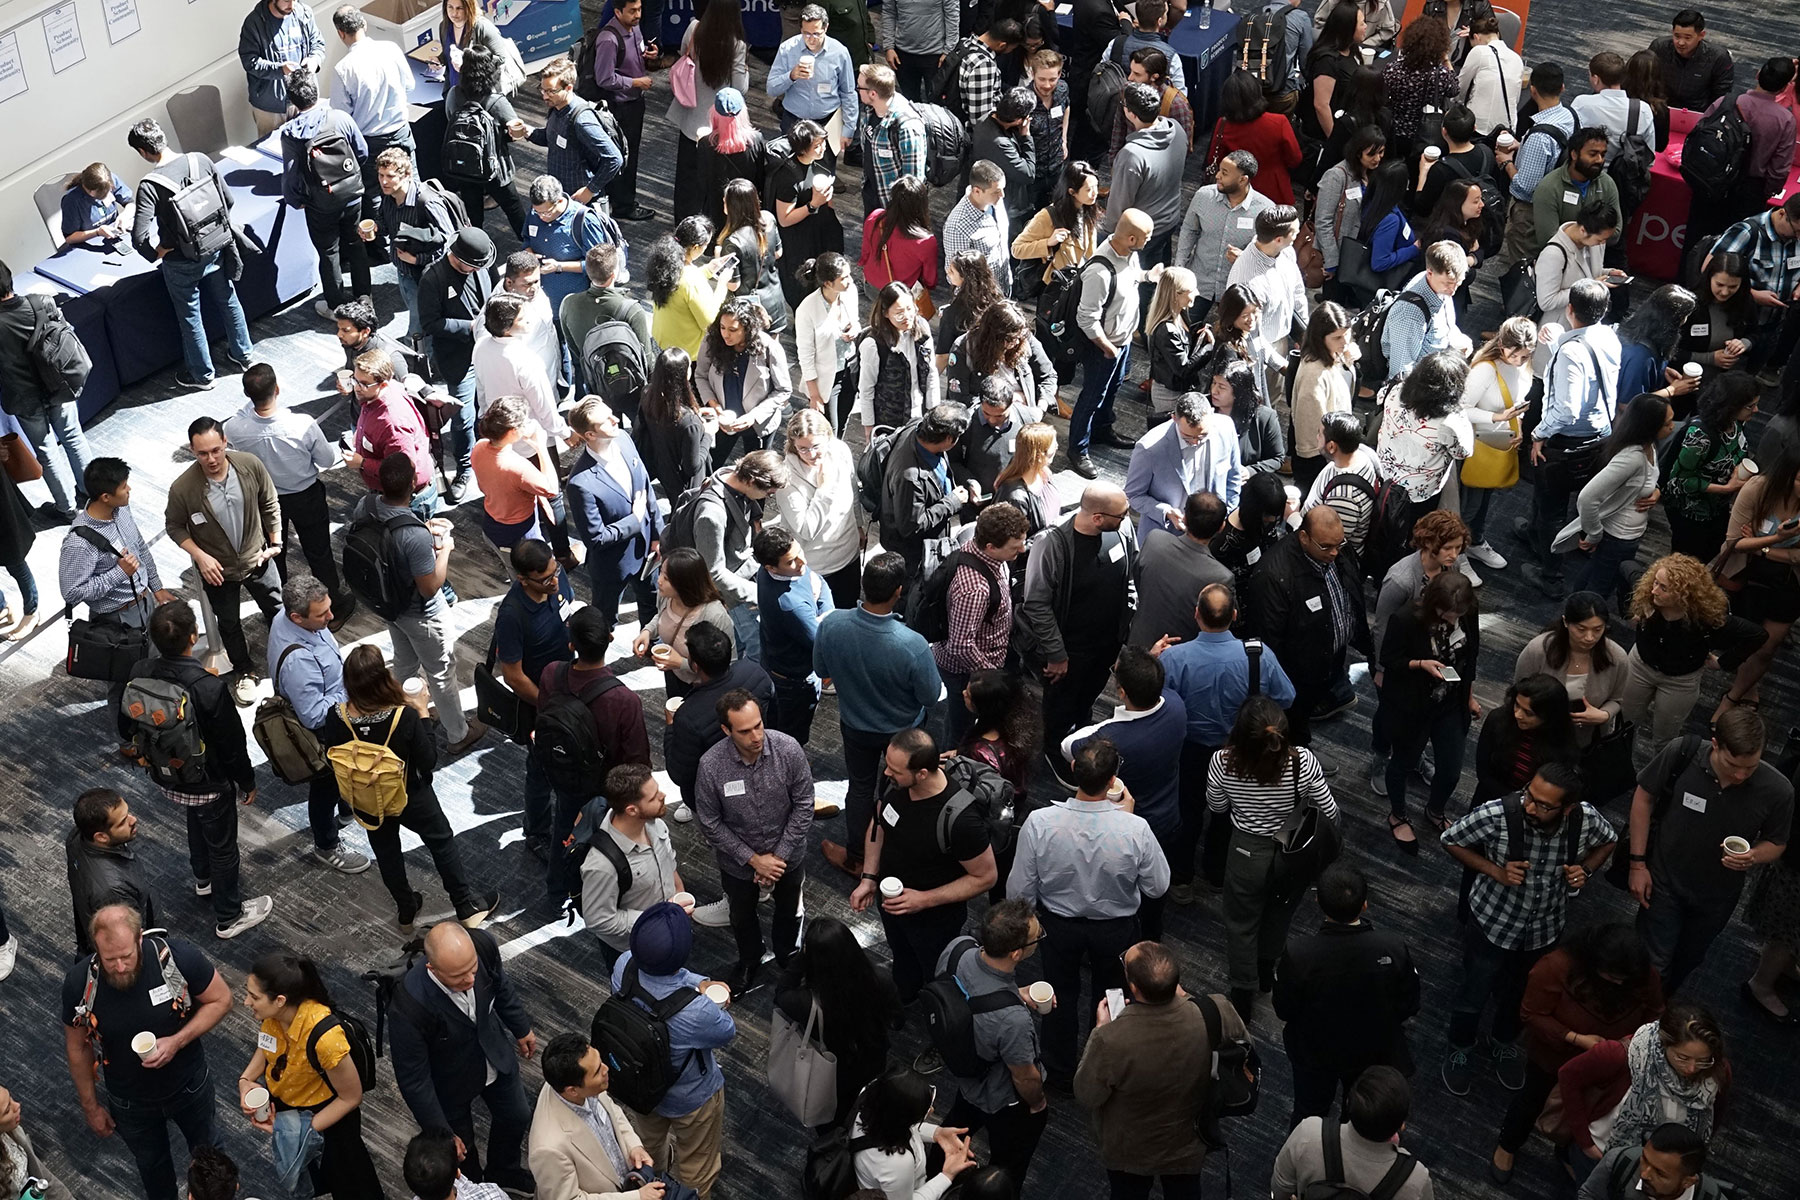 Large crowd of people standing and browsing booths in a convention setting